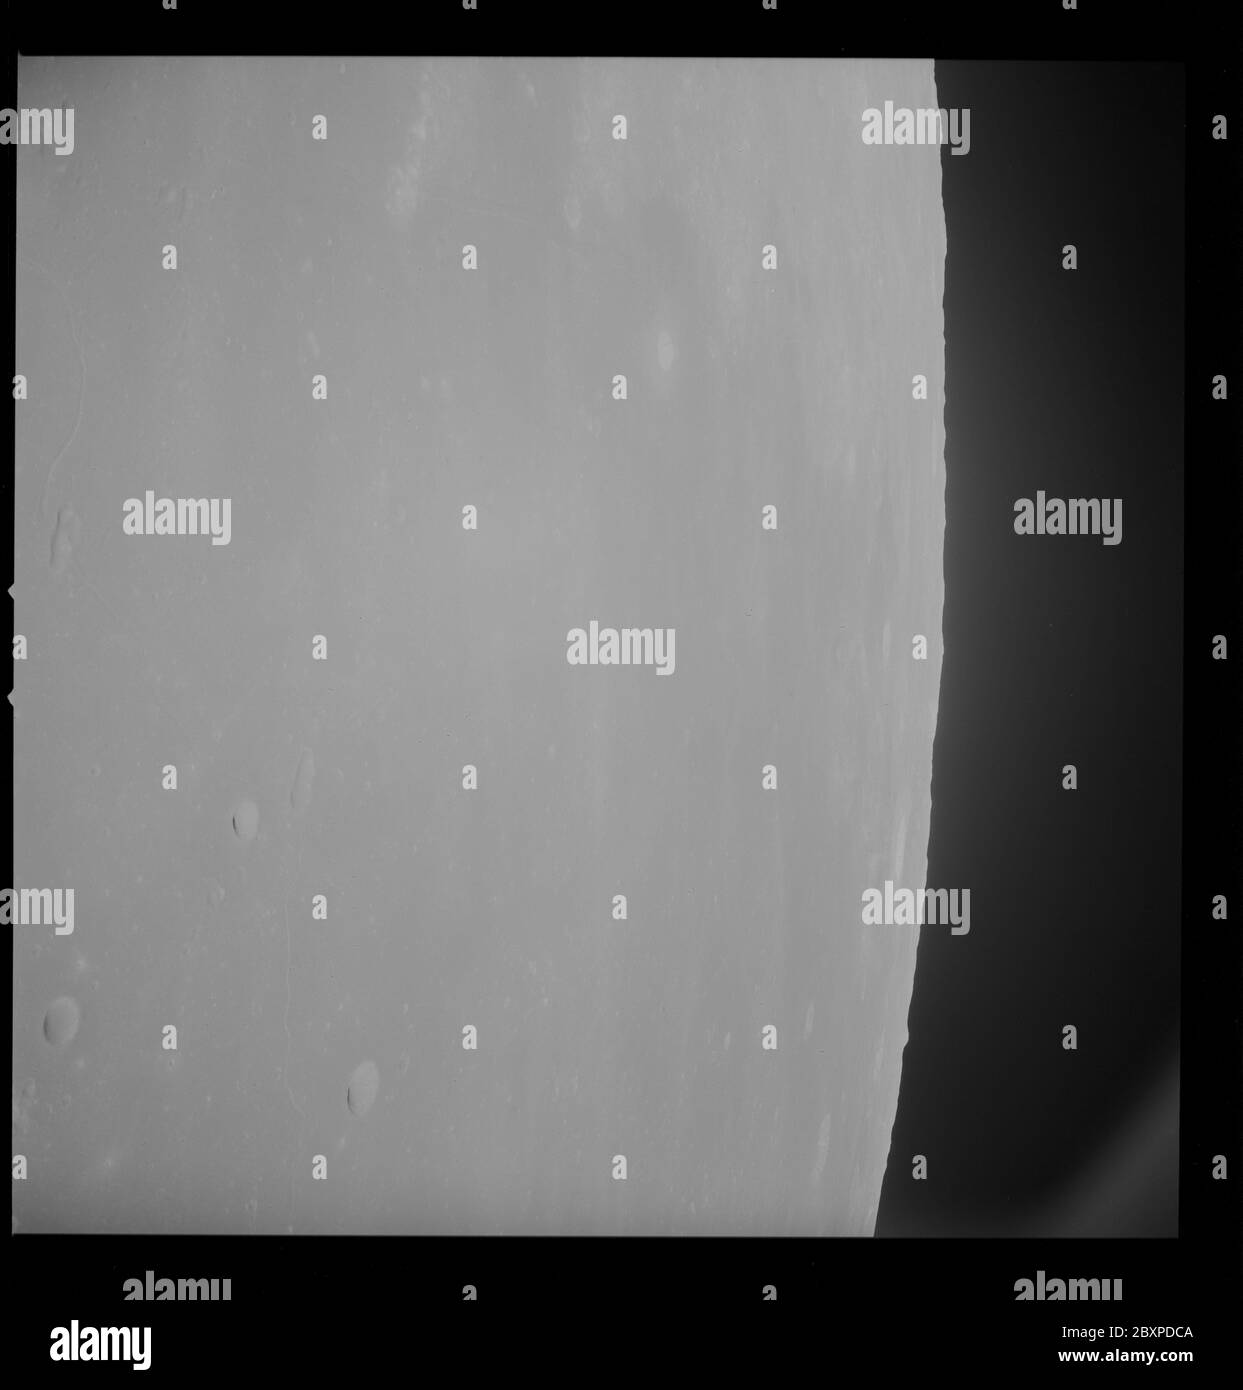 AS10-32-4751 - Apollo 10 - Apollo 10 Mission image - Site 2, Target of Opportunity 112 and 114; Scope and content:  The original database describes this as: Description: Oblique view of Site 2,Target of Opportunity 112 and 114 taken during Apollo 10 Mission.  Longitude was 25.0 east degrees east and Latitude was 0.6 degrees north.  Sun angle was medium.  Film magazine was S,film type was 3400 with 80mm lens.  Film type was 70mm black and white. Subject Terms: Apollo 10 Flight, Moon Categories: Lunar Observations Original: Film - 70MM B&W Interior Exterior: Exterior  Ground Orbit: On-orbit; 196 Stock Photo